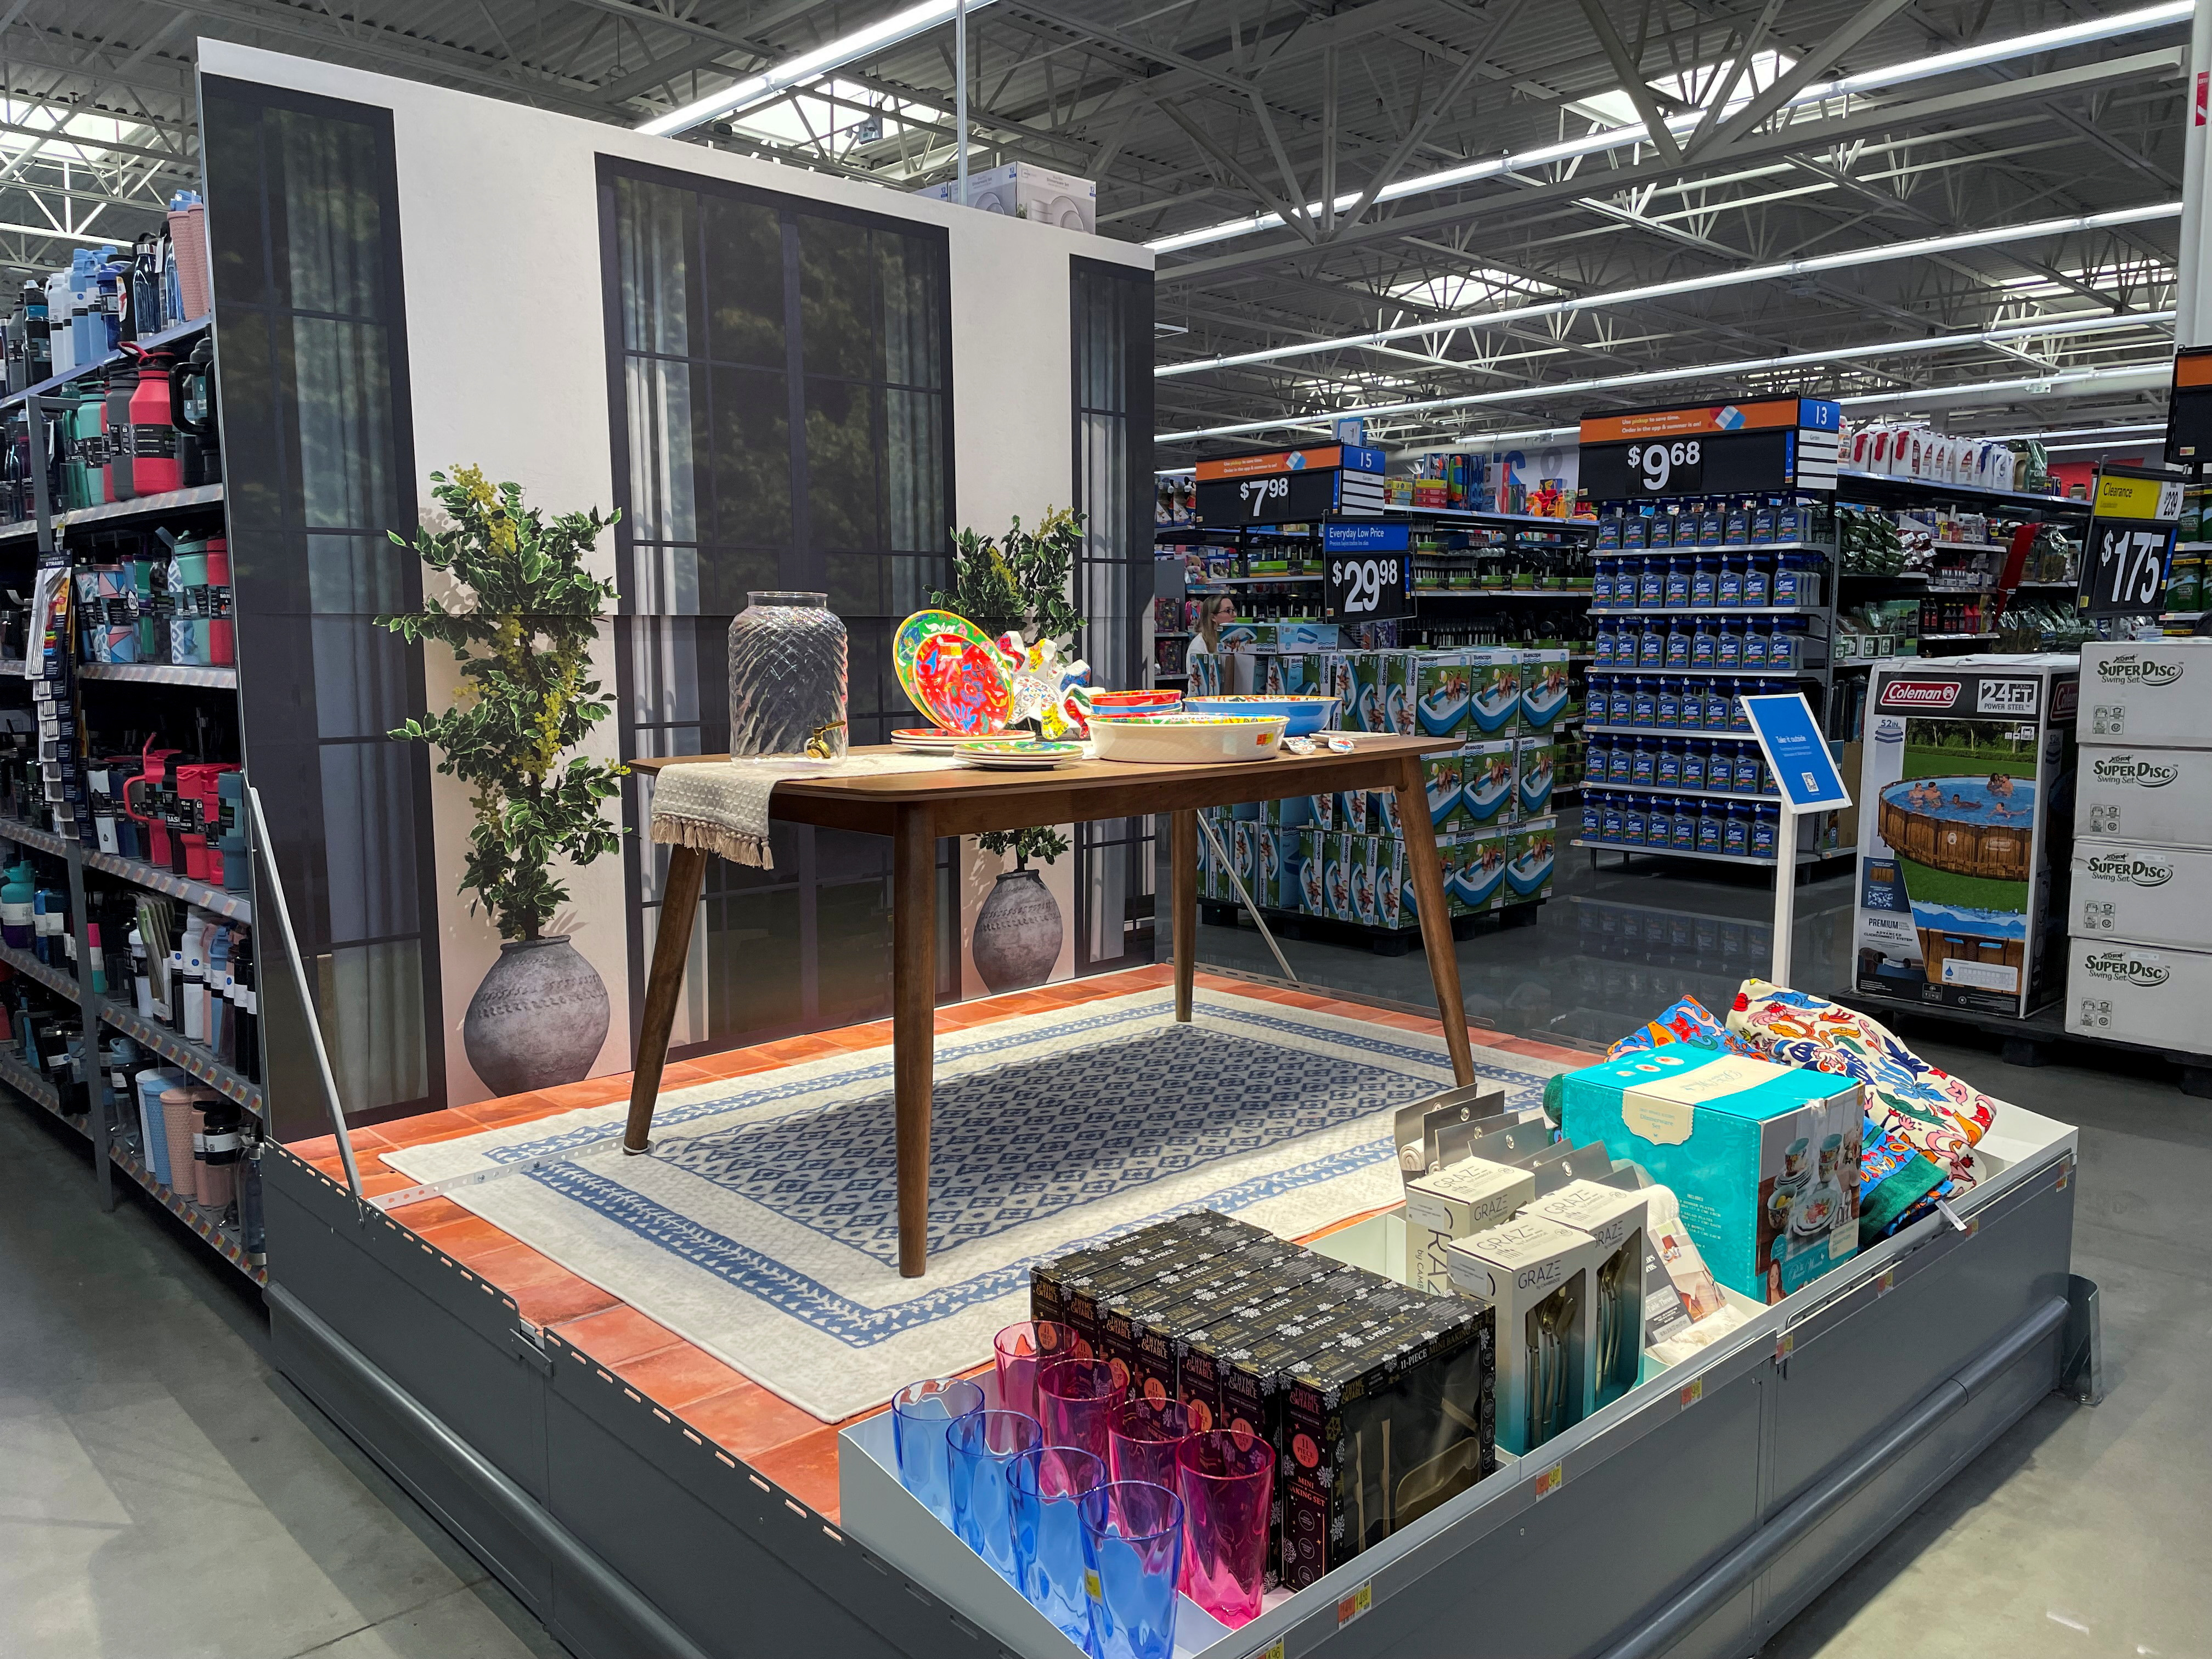 Walmart strategy to launch apparel, home brands is being put to